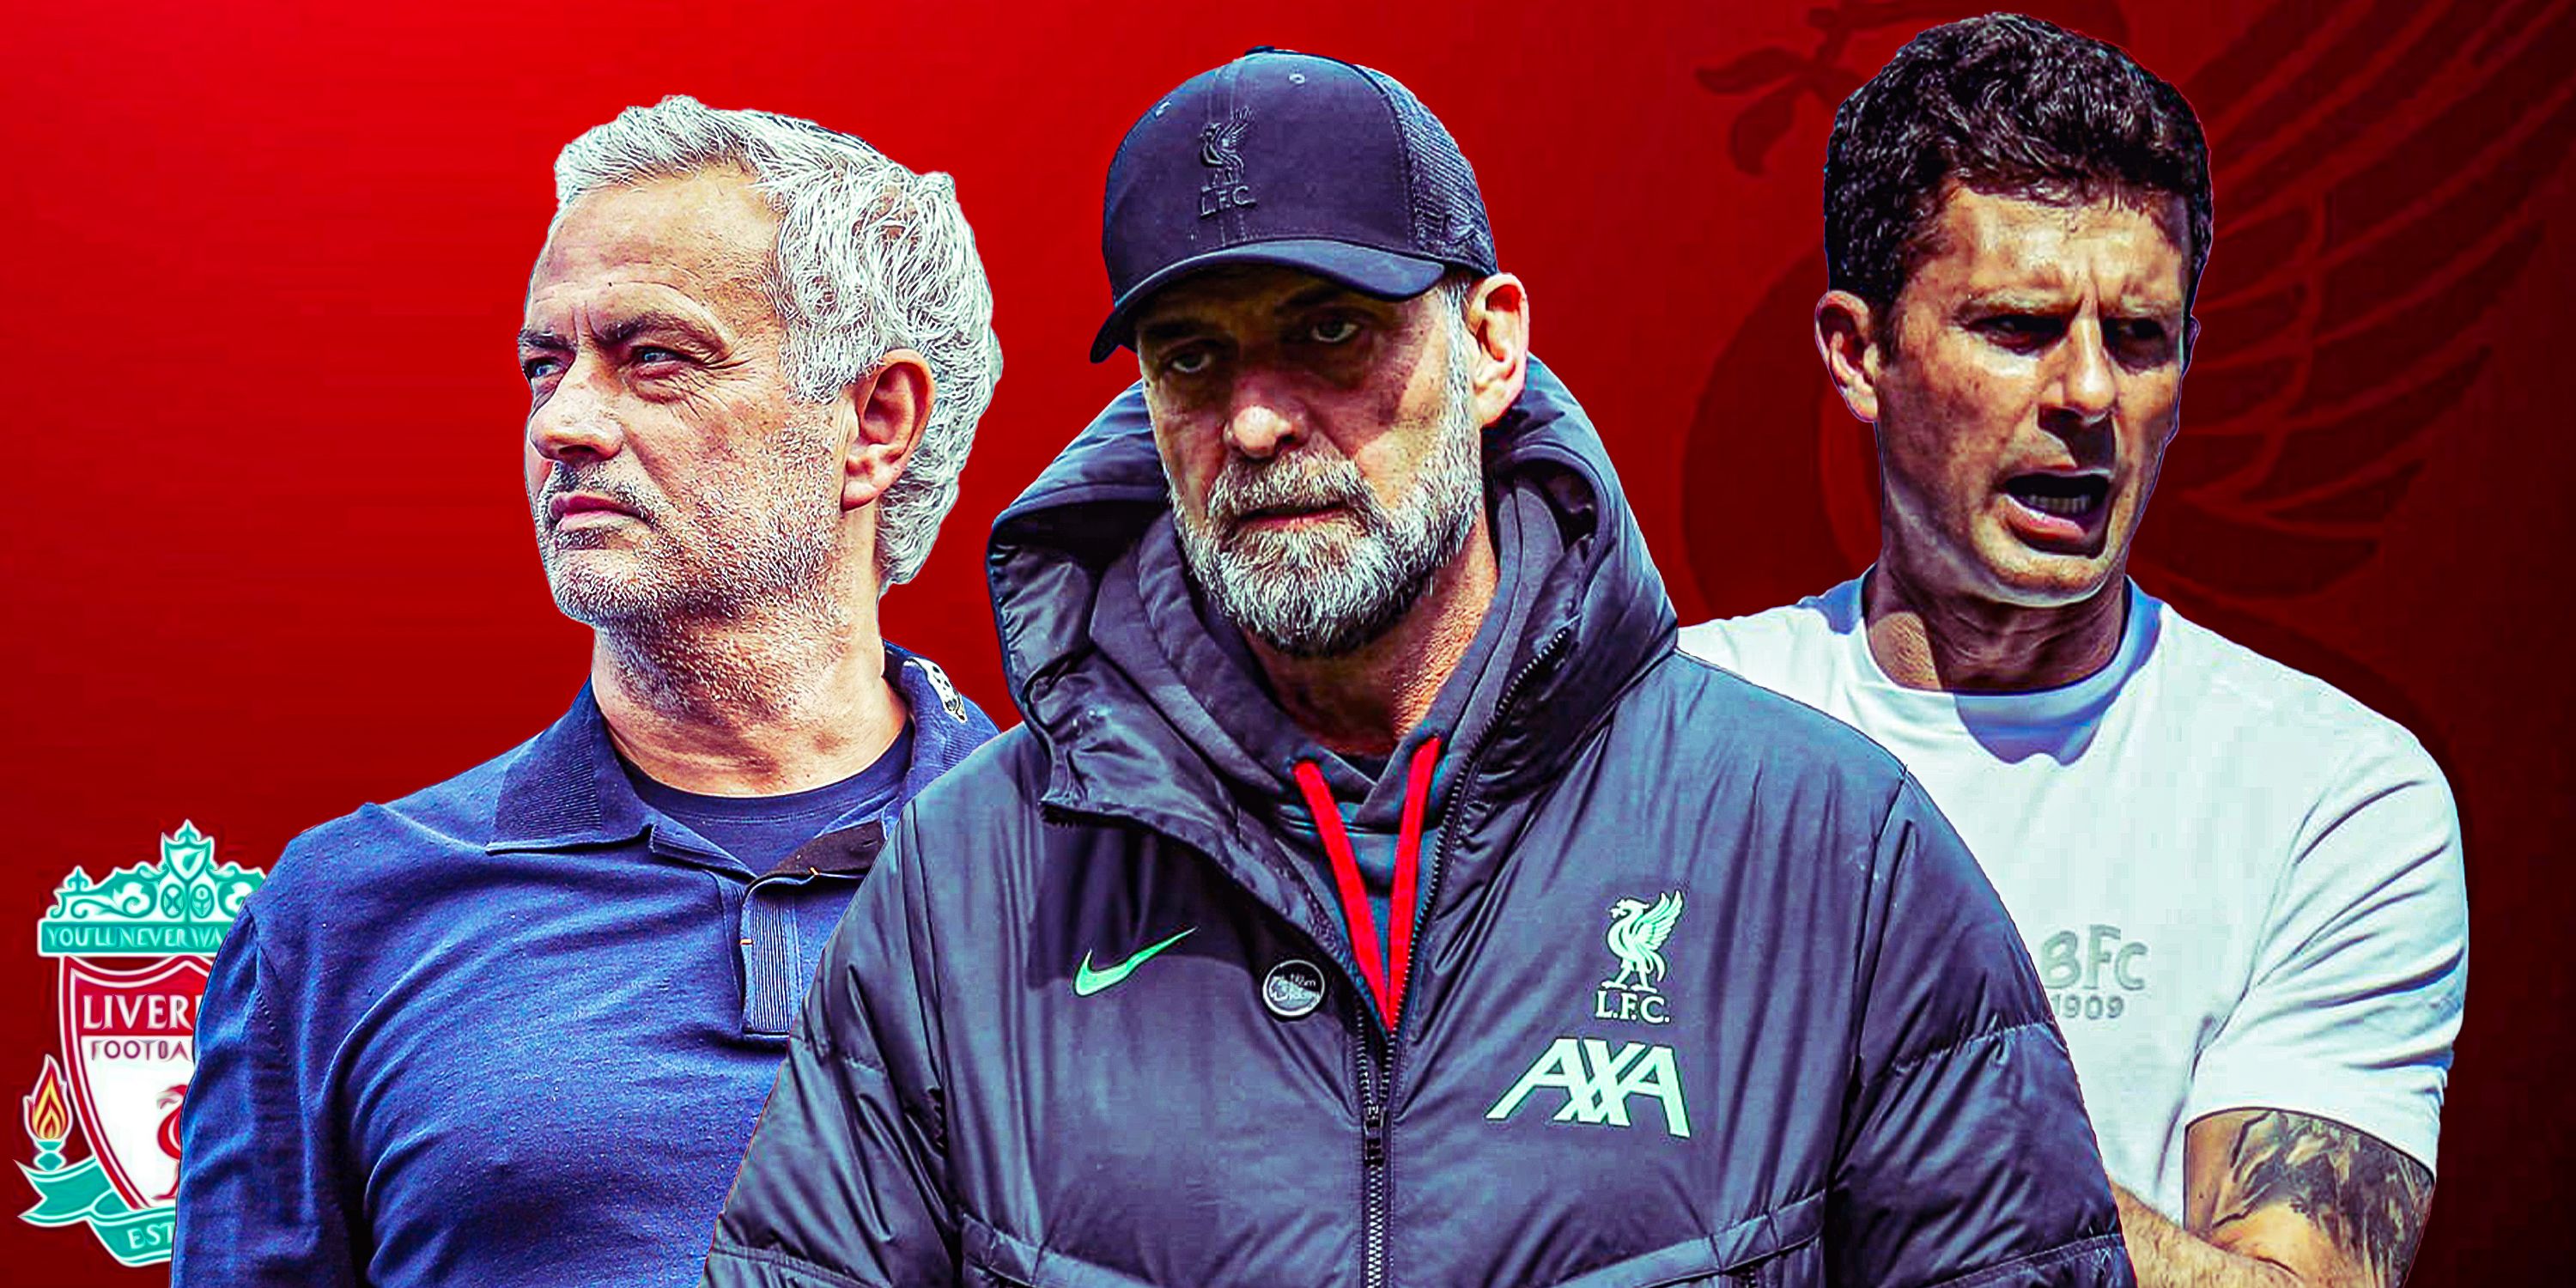 Jurgen Klopp in the middle with Jose Mourinho and Thiago Motta on either side with Liverpool badge and theme 